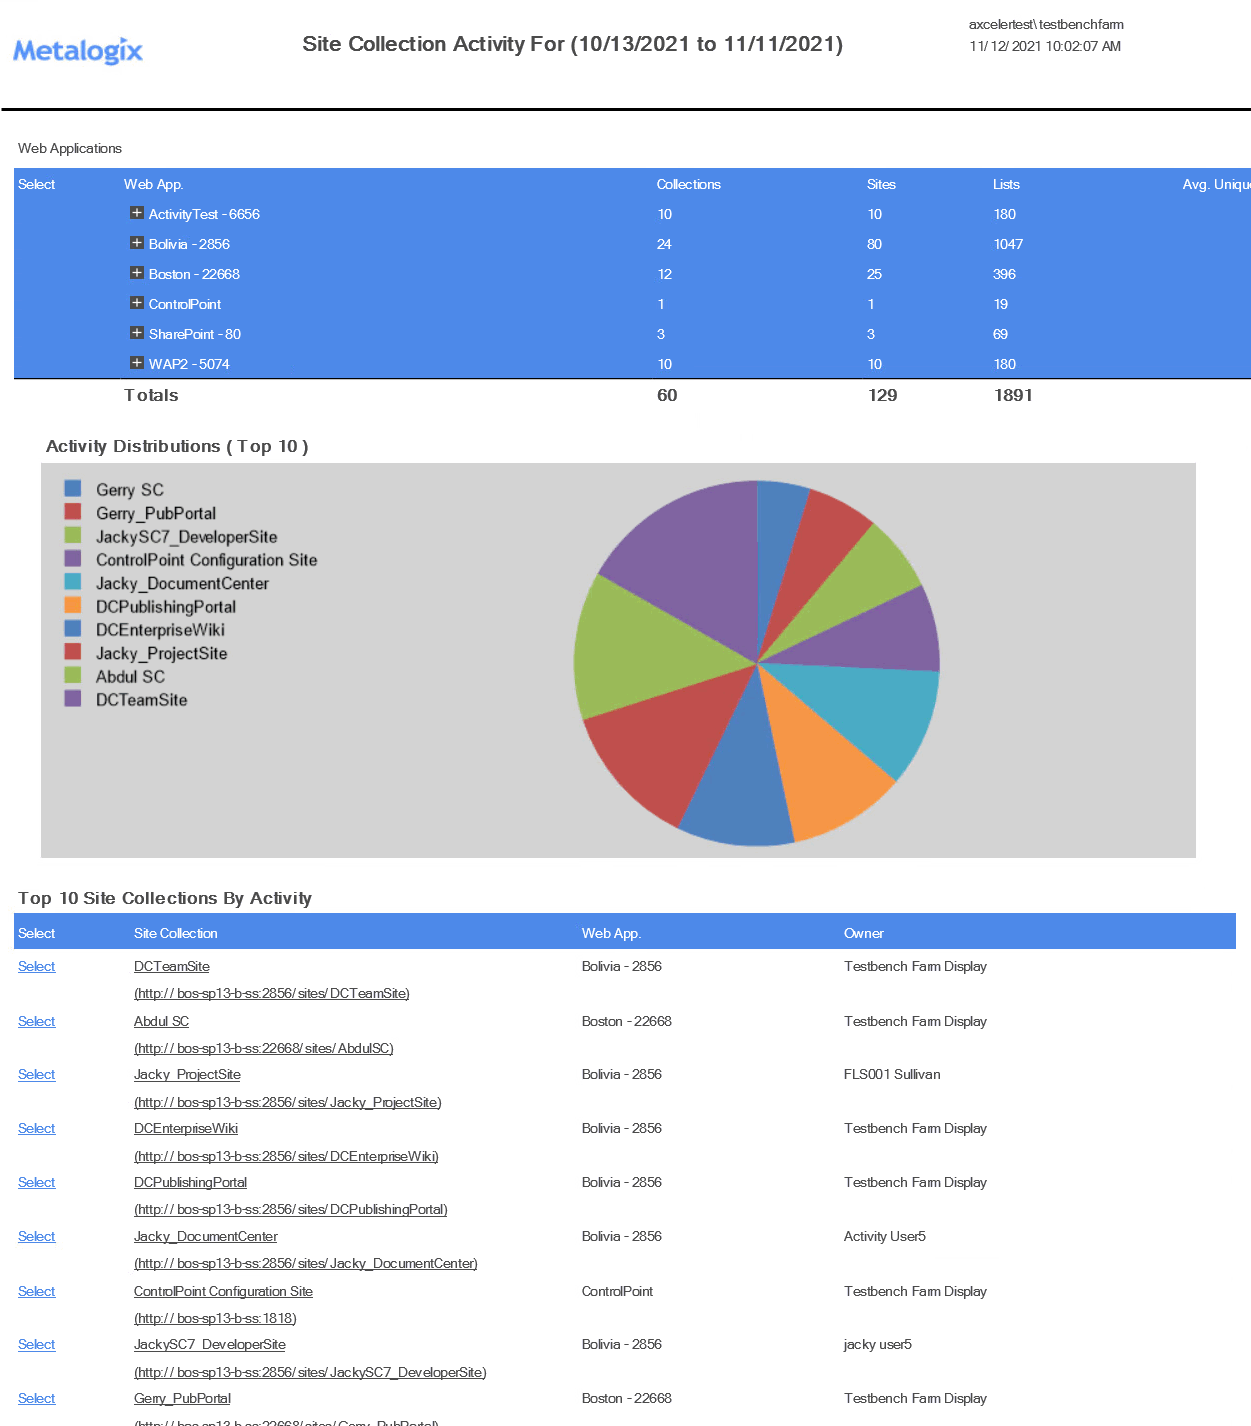 Activity Analysis RESULTS